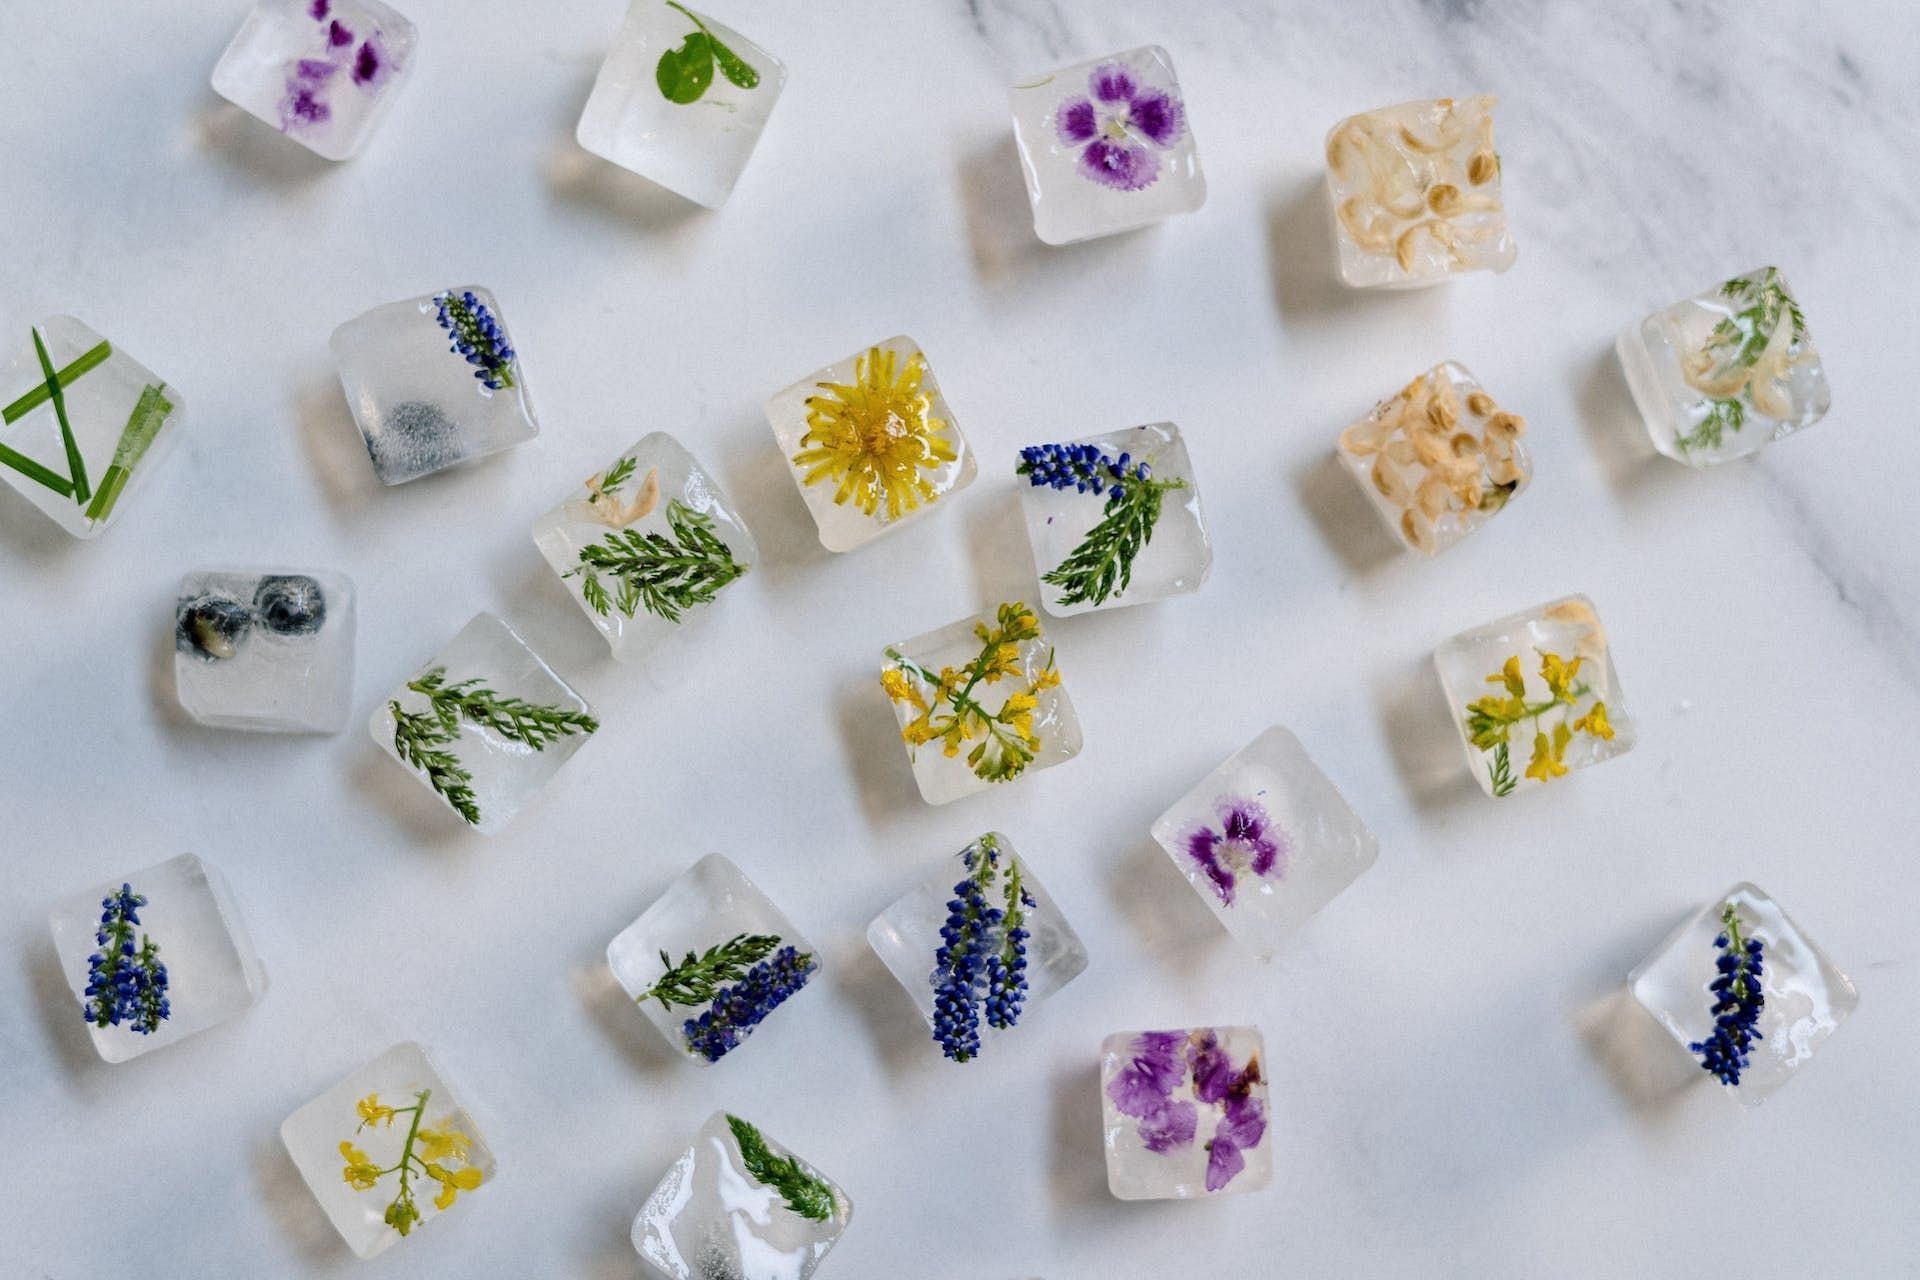 Frozen Immunity Cubes are a healthy refreshing innovation (Image via Pexels/cottonbro studio)